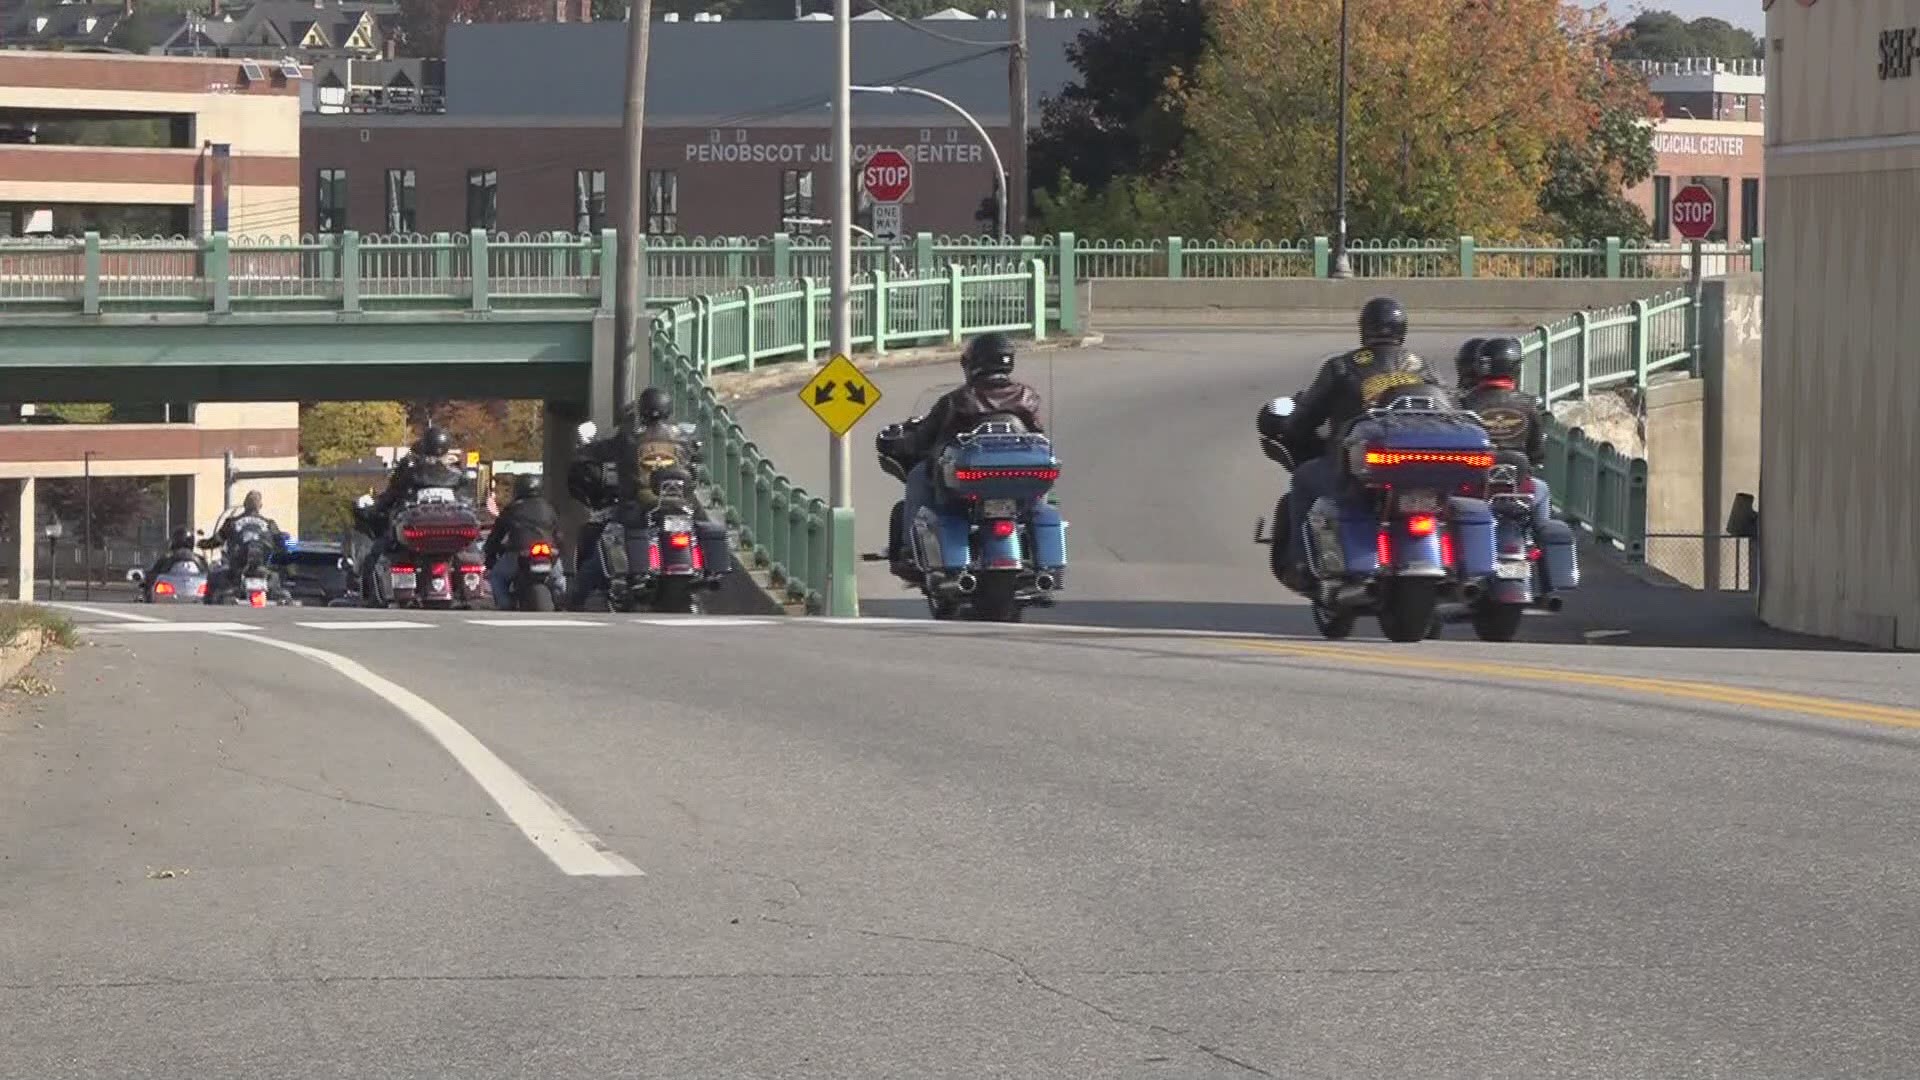 People riding motorcycles gathered together to raise funds for Concerns of Police Survivors Maine Chapter.